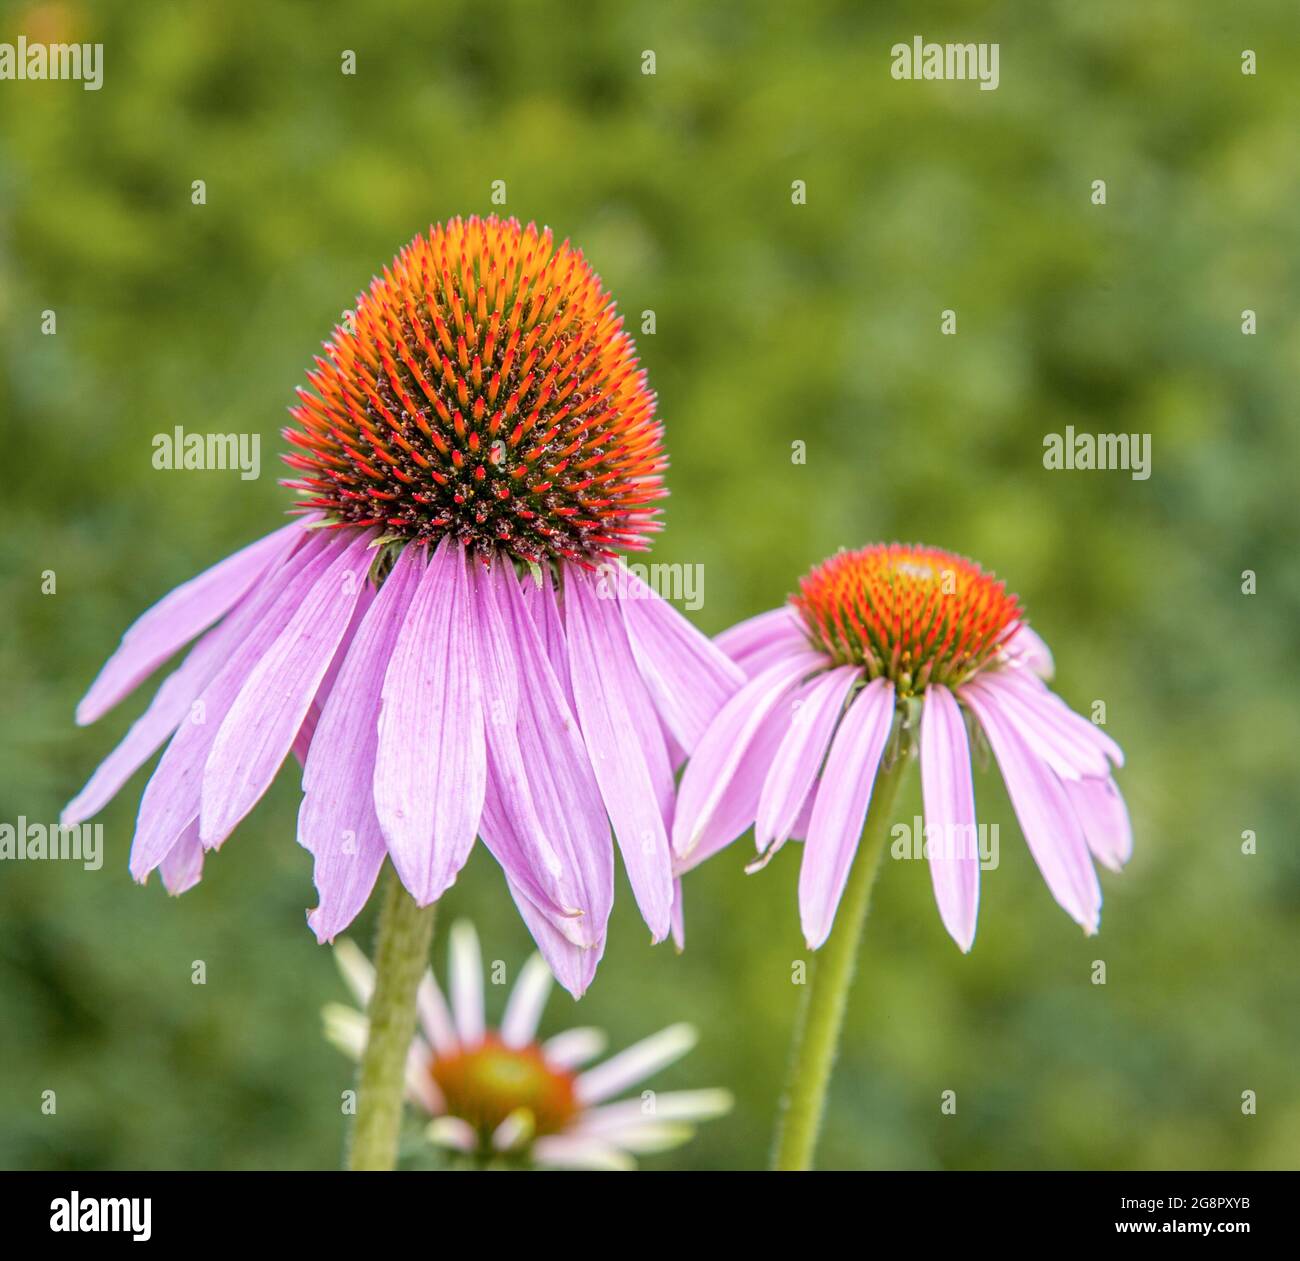 Flowers of Echinacea purpurea the Cone Flower in an English country garden Stock Photo